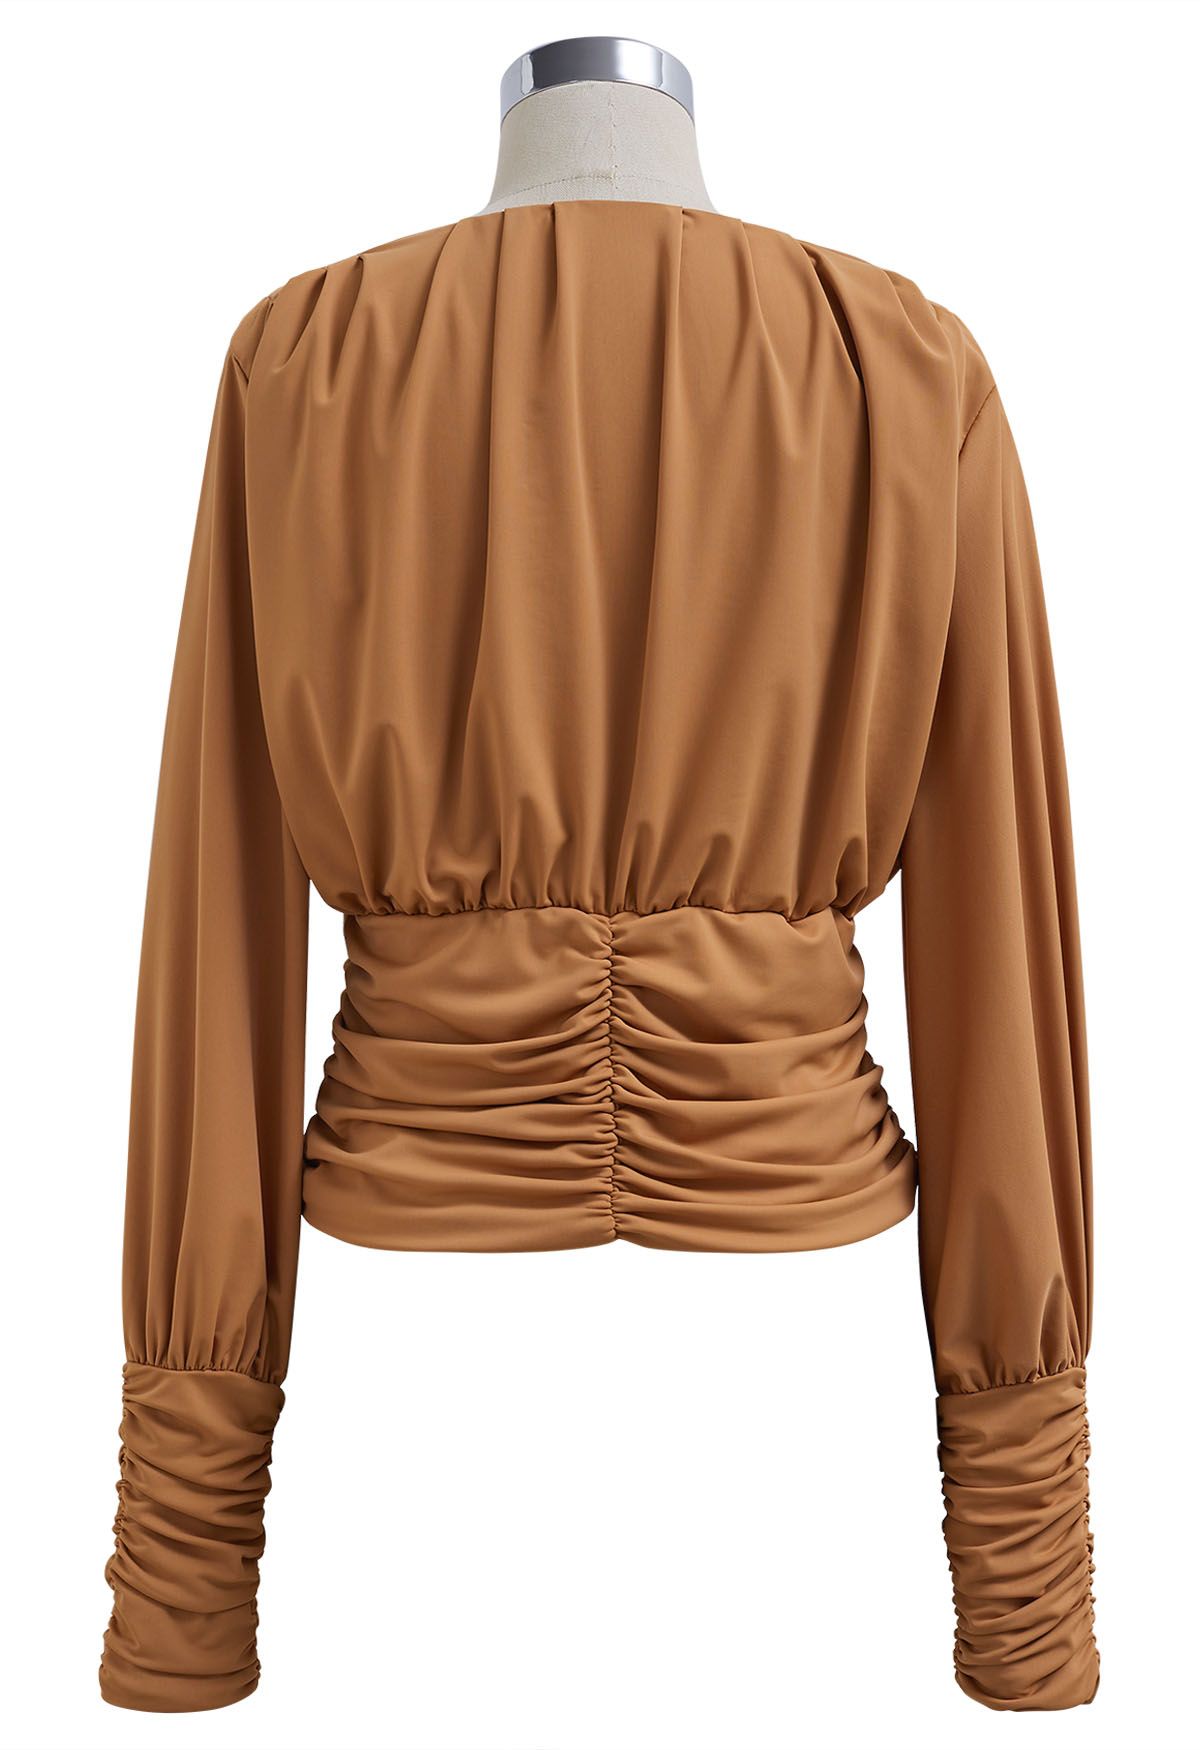 Tender Ruched Detail Faux Wrap Top in Caramel